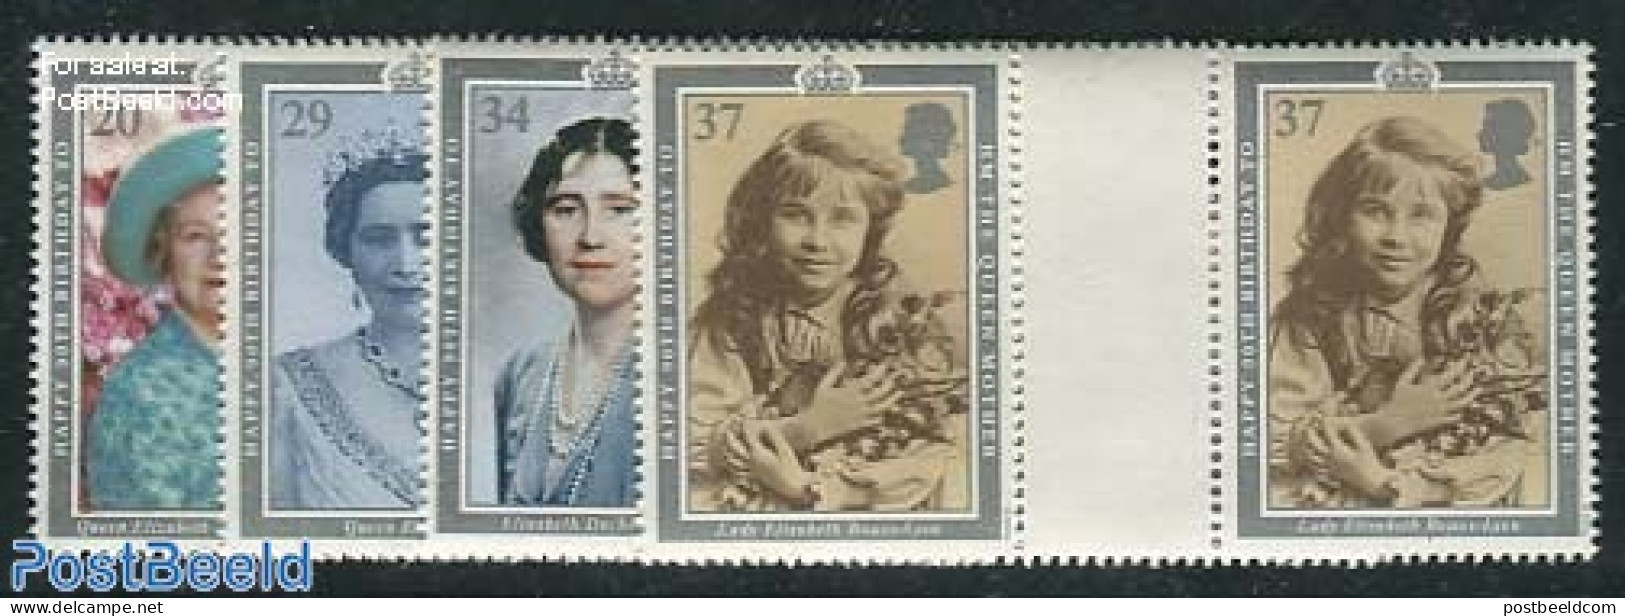 Great Britain 1990 Mother Queen Marry 4v, Gutter Pairs, Mint NH, History - Kings & Queens (Royalty) - Unused Stamps